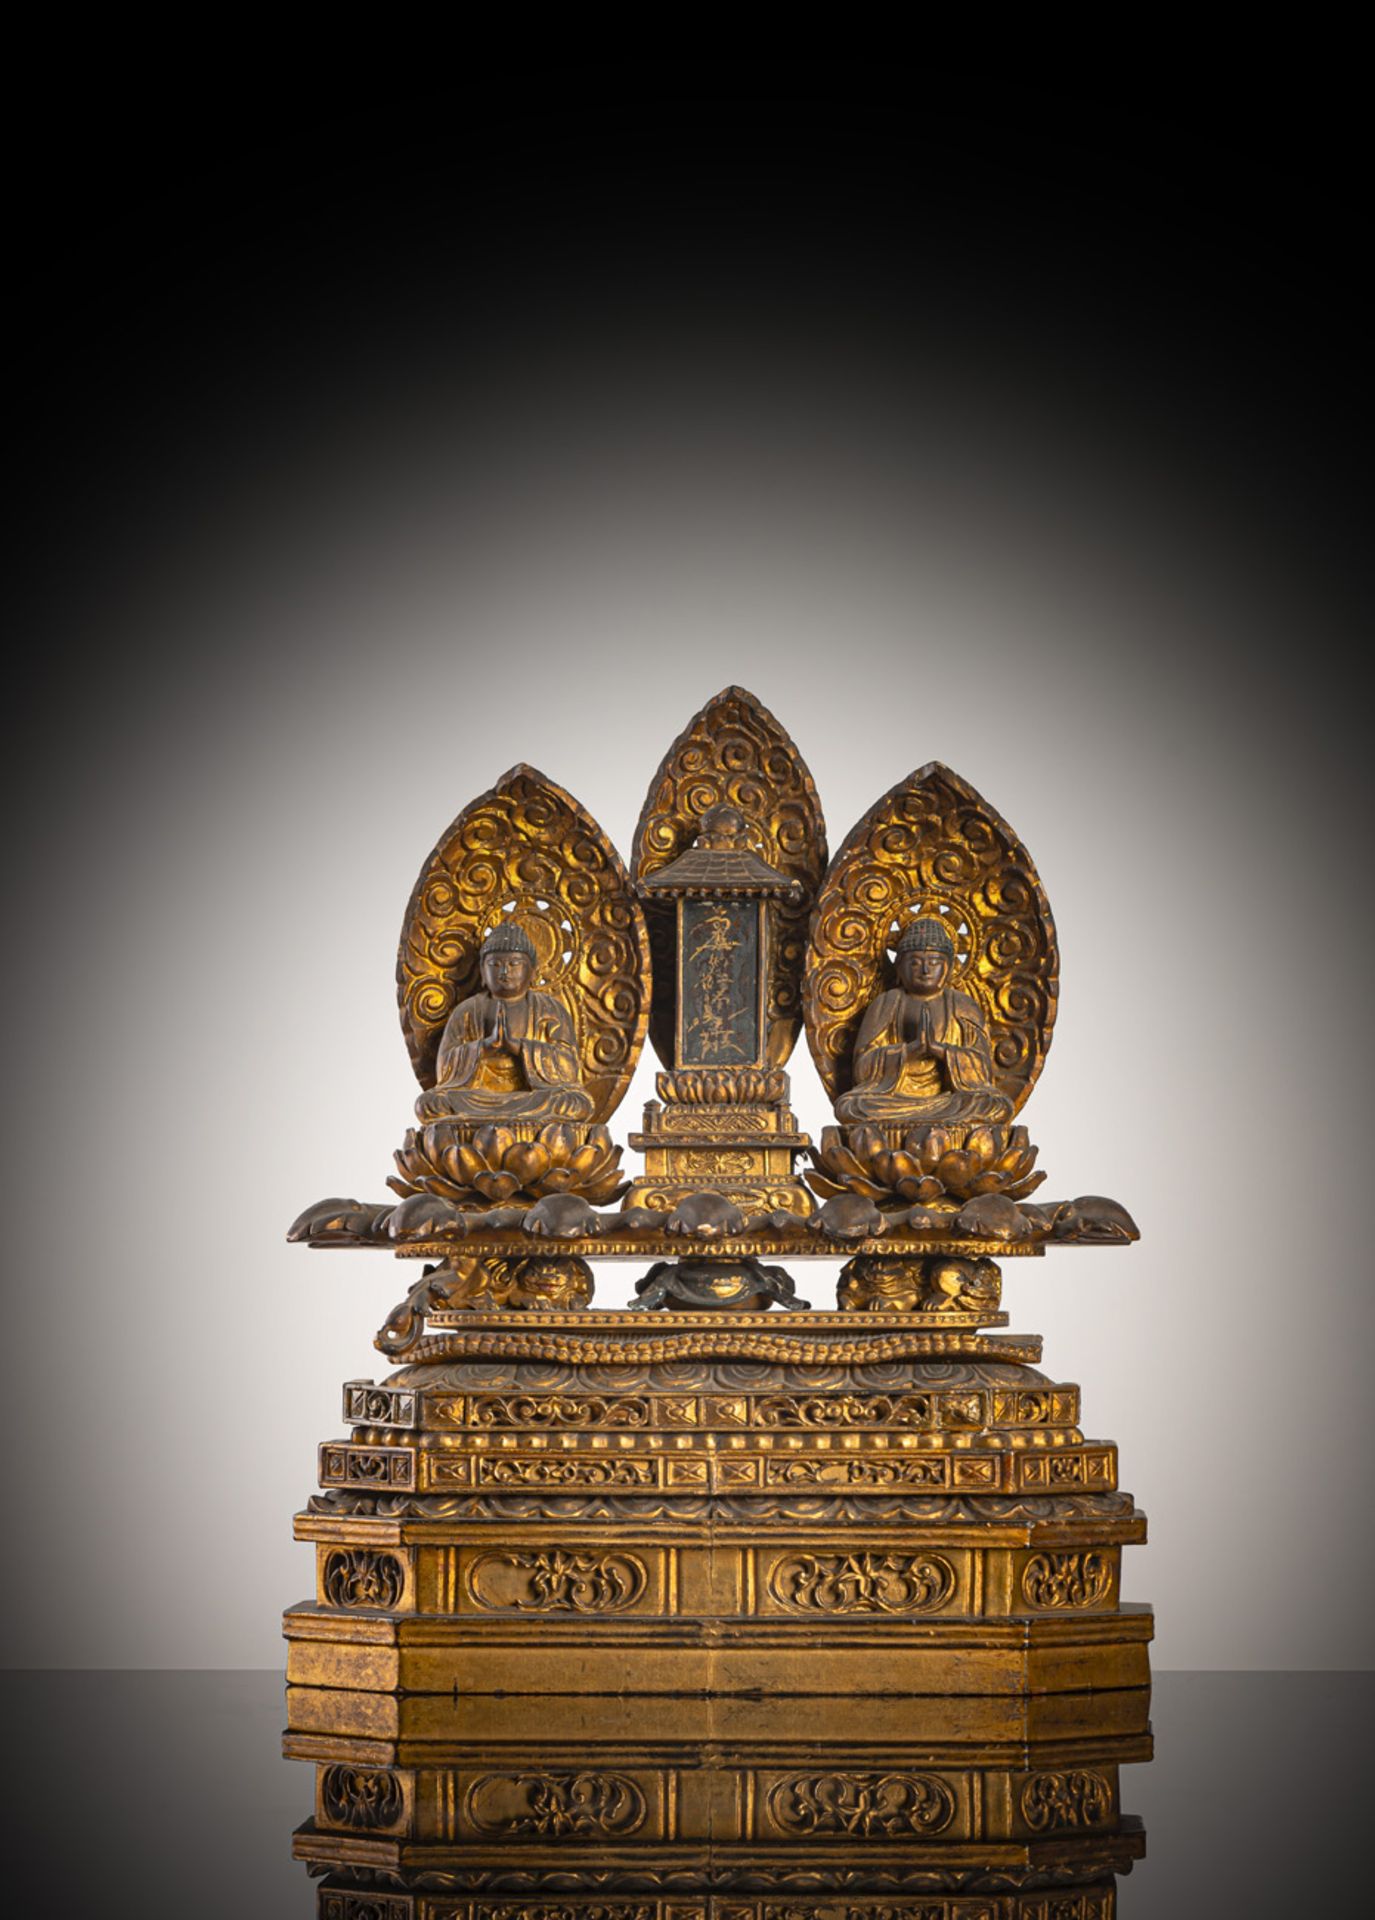 A GILT- AND BLACK-LACQUERED WOOD SHRINE